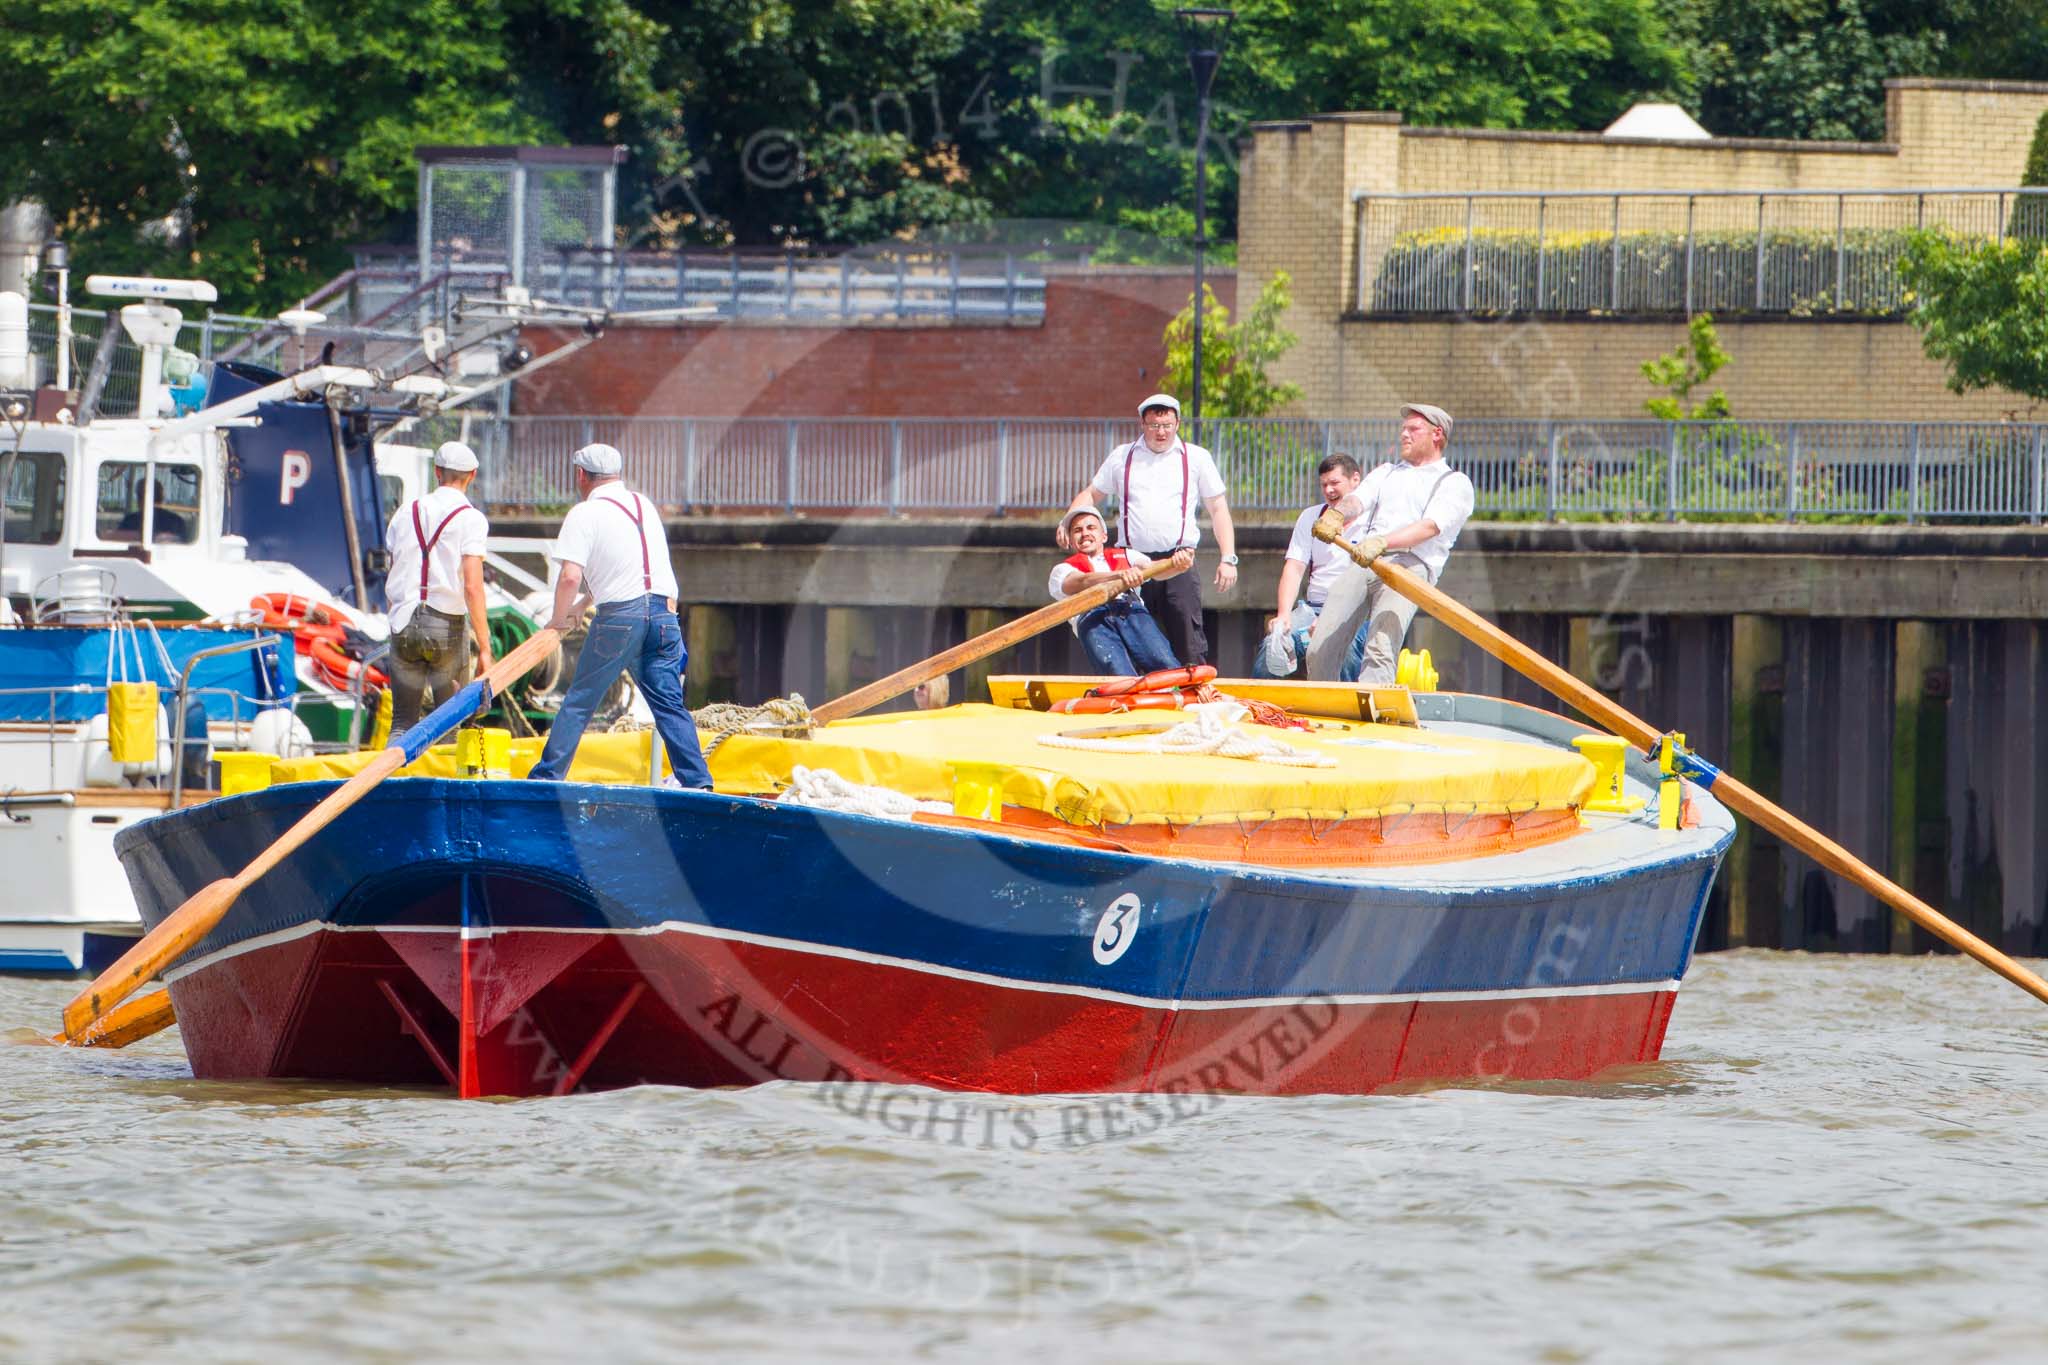 TOW River Thames Barge Driving Race 2014.
River Thames between Greenwich and Westminster,
London,

United Kingdom,
on 28 June 2014 at 12:43, image #127